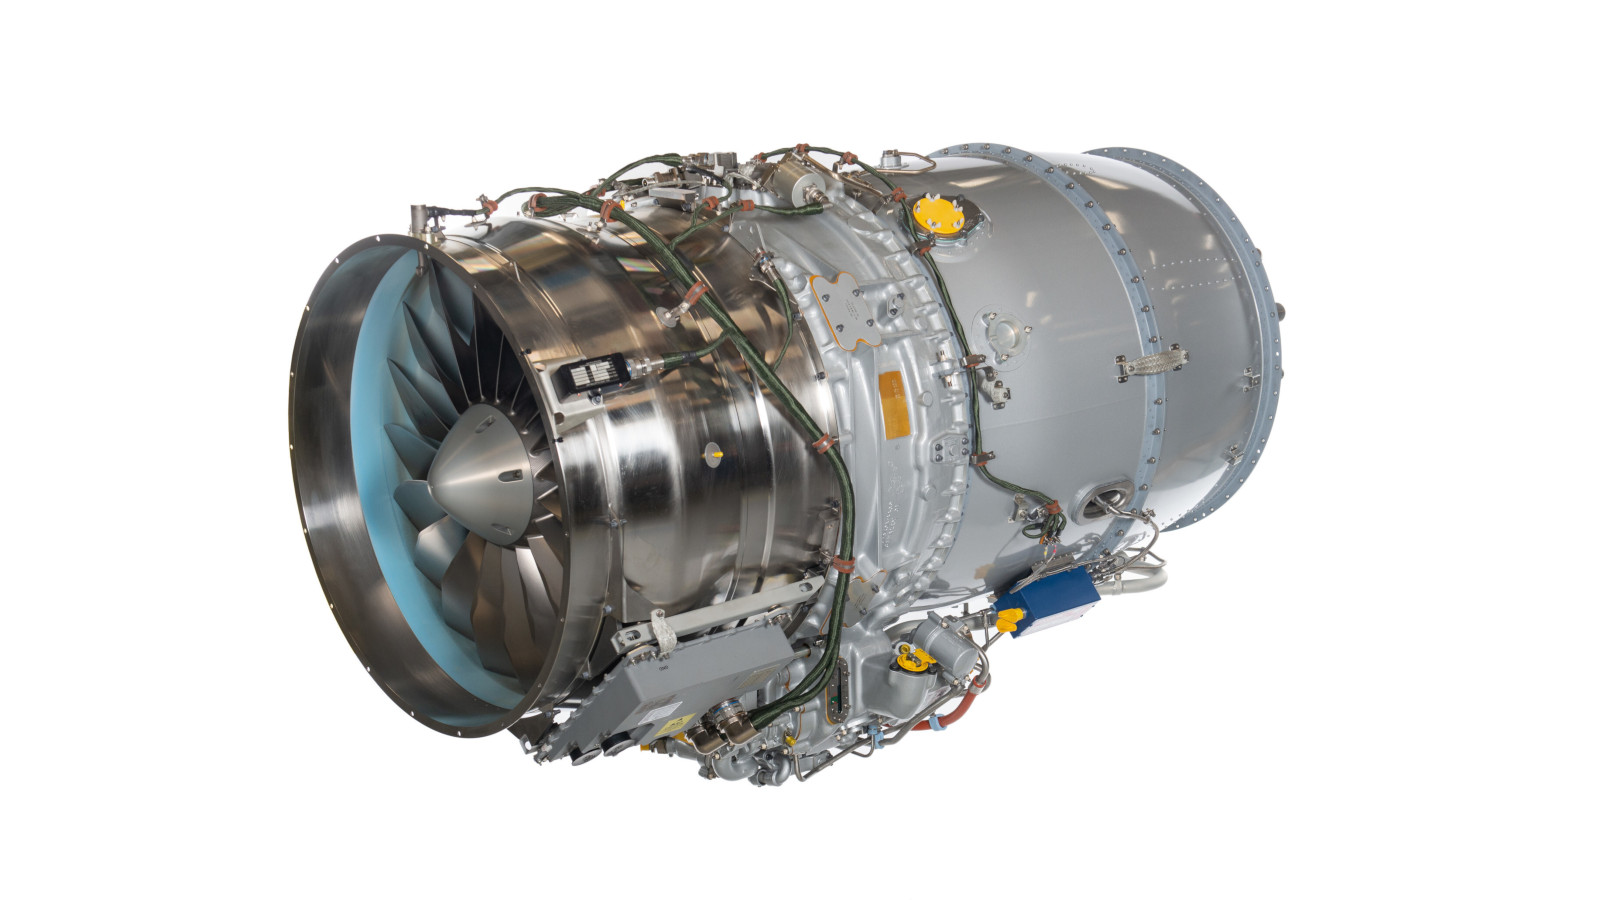 Transport Canada Grants Type Certification to P&WC PW545D Engine